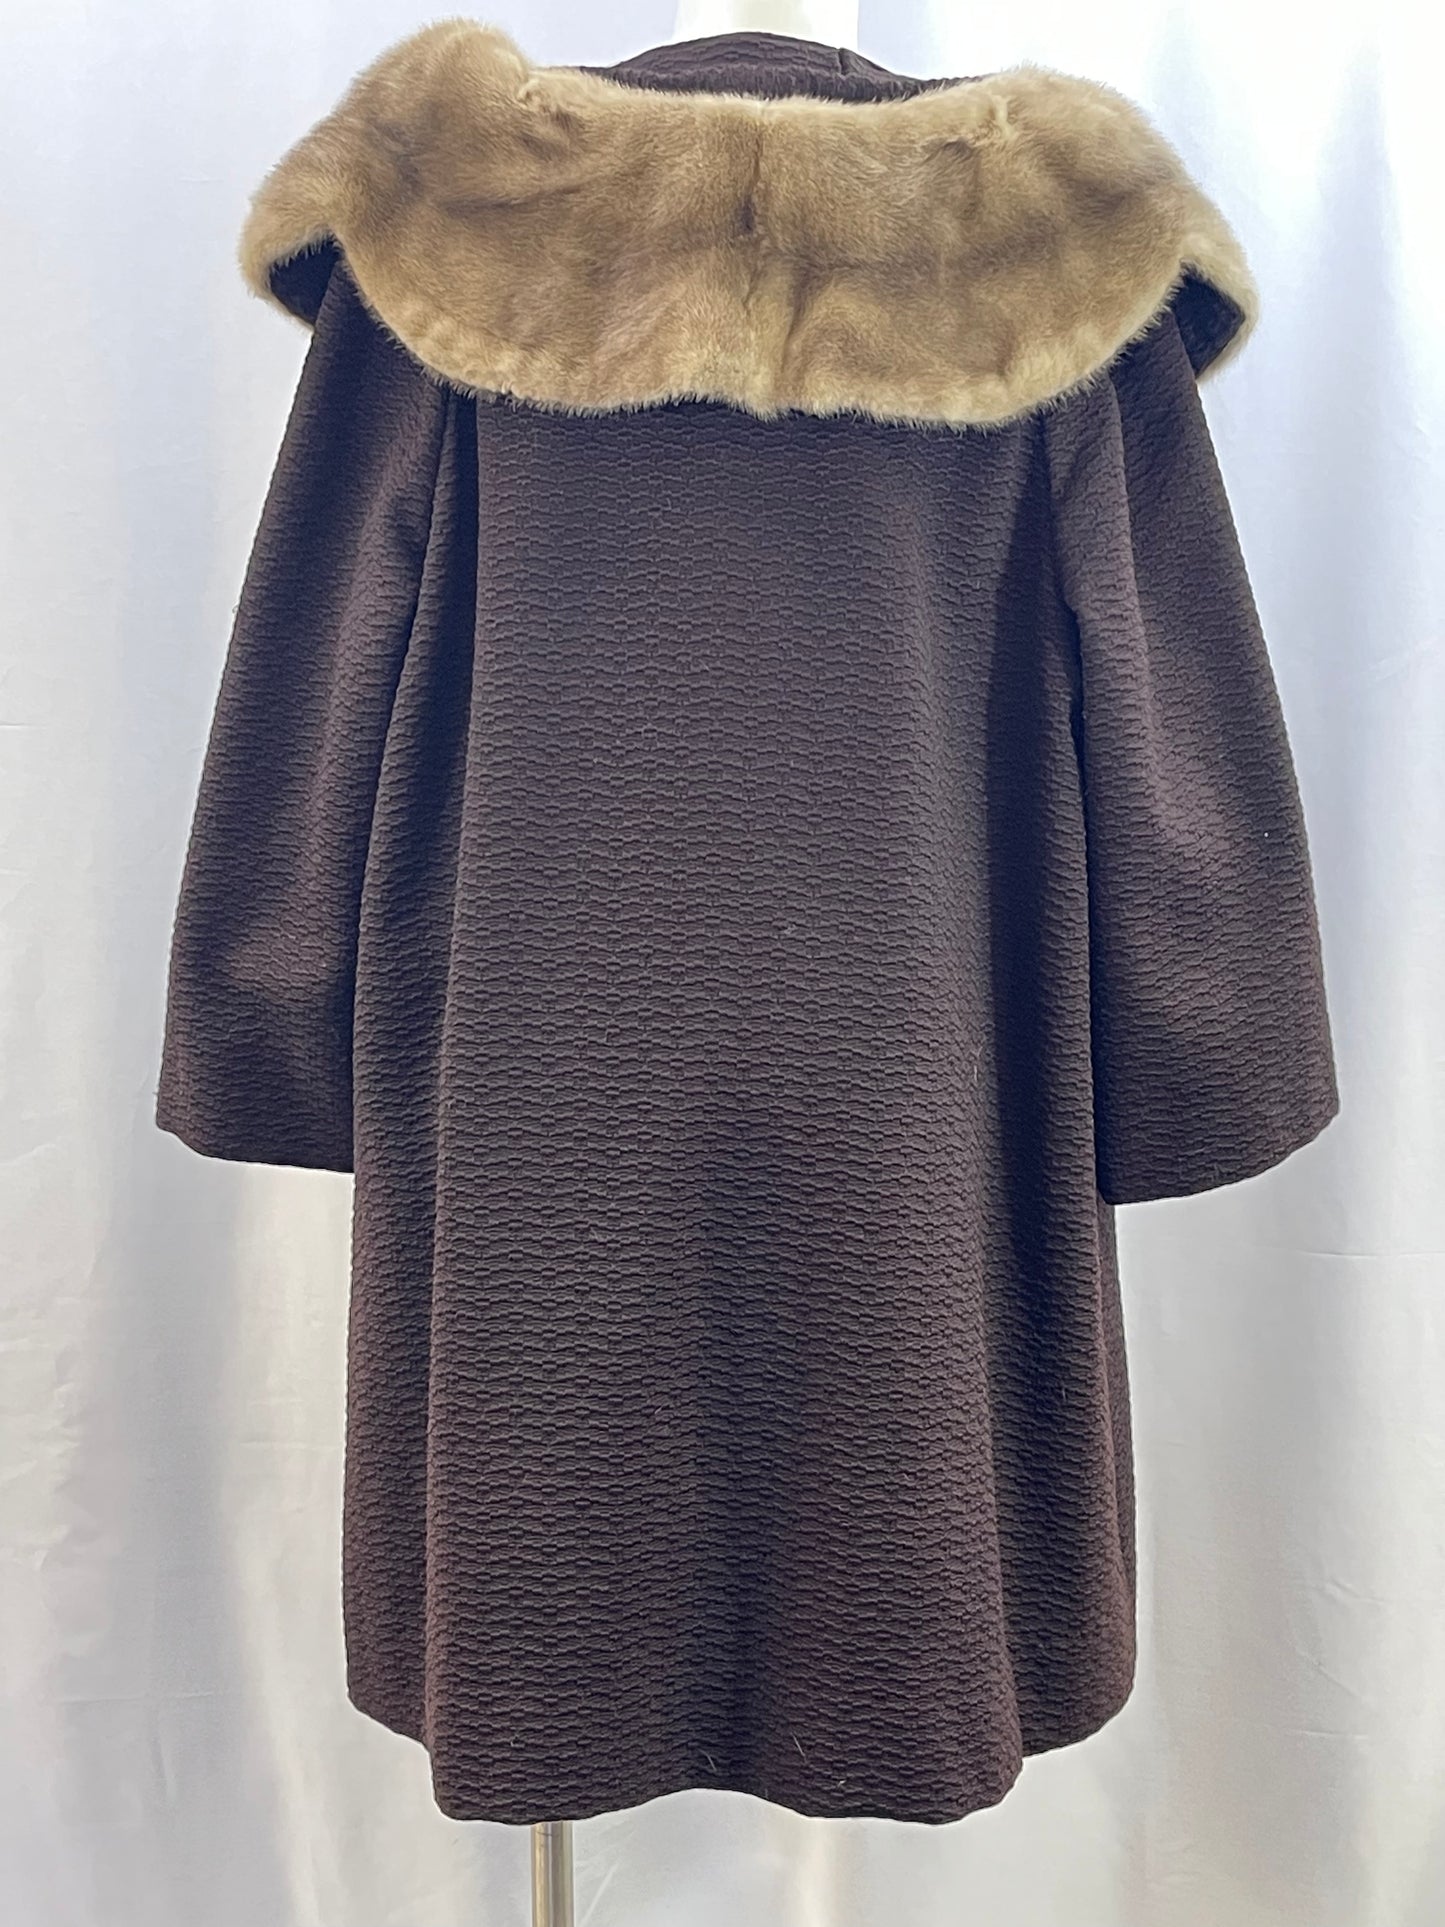 Brown Cloth Coat with Mink Collar